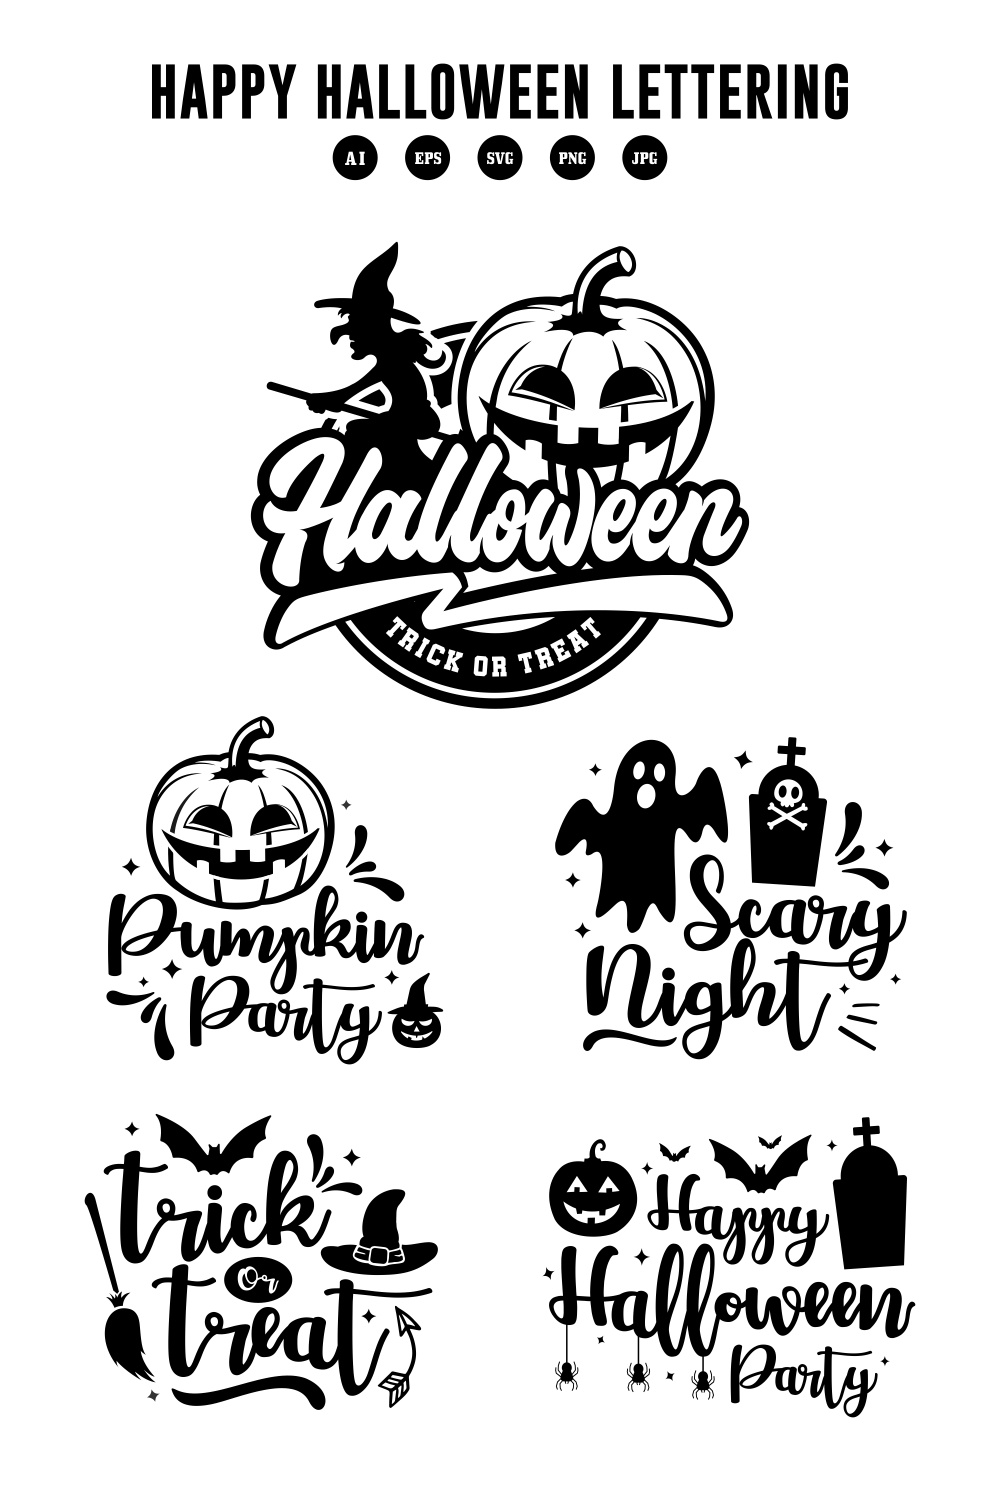 5 Happy halloween lettering design collection - $6 pinterest preview image.